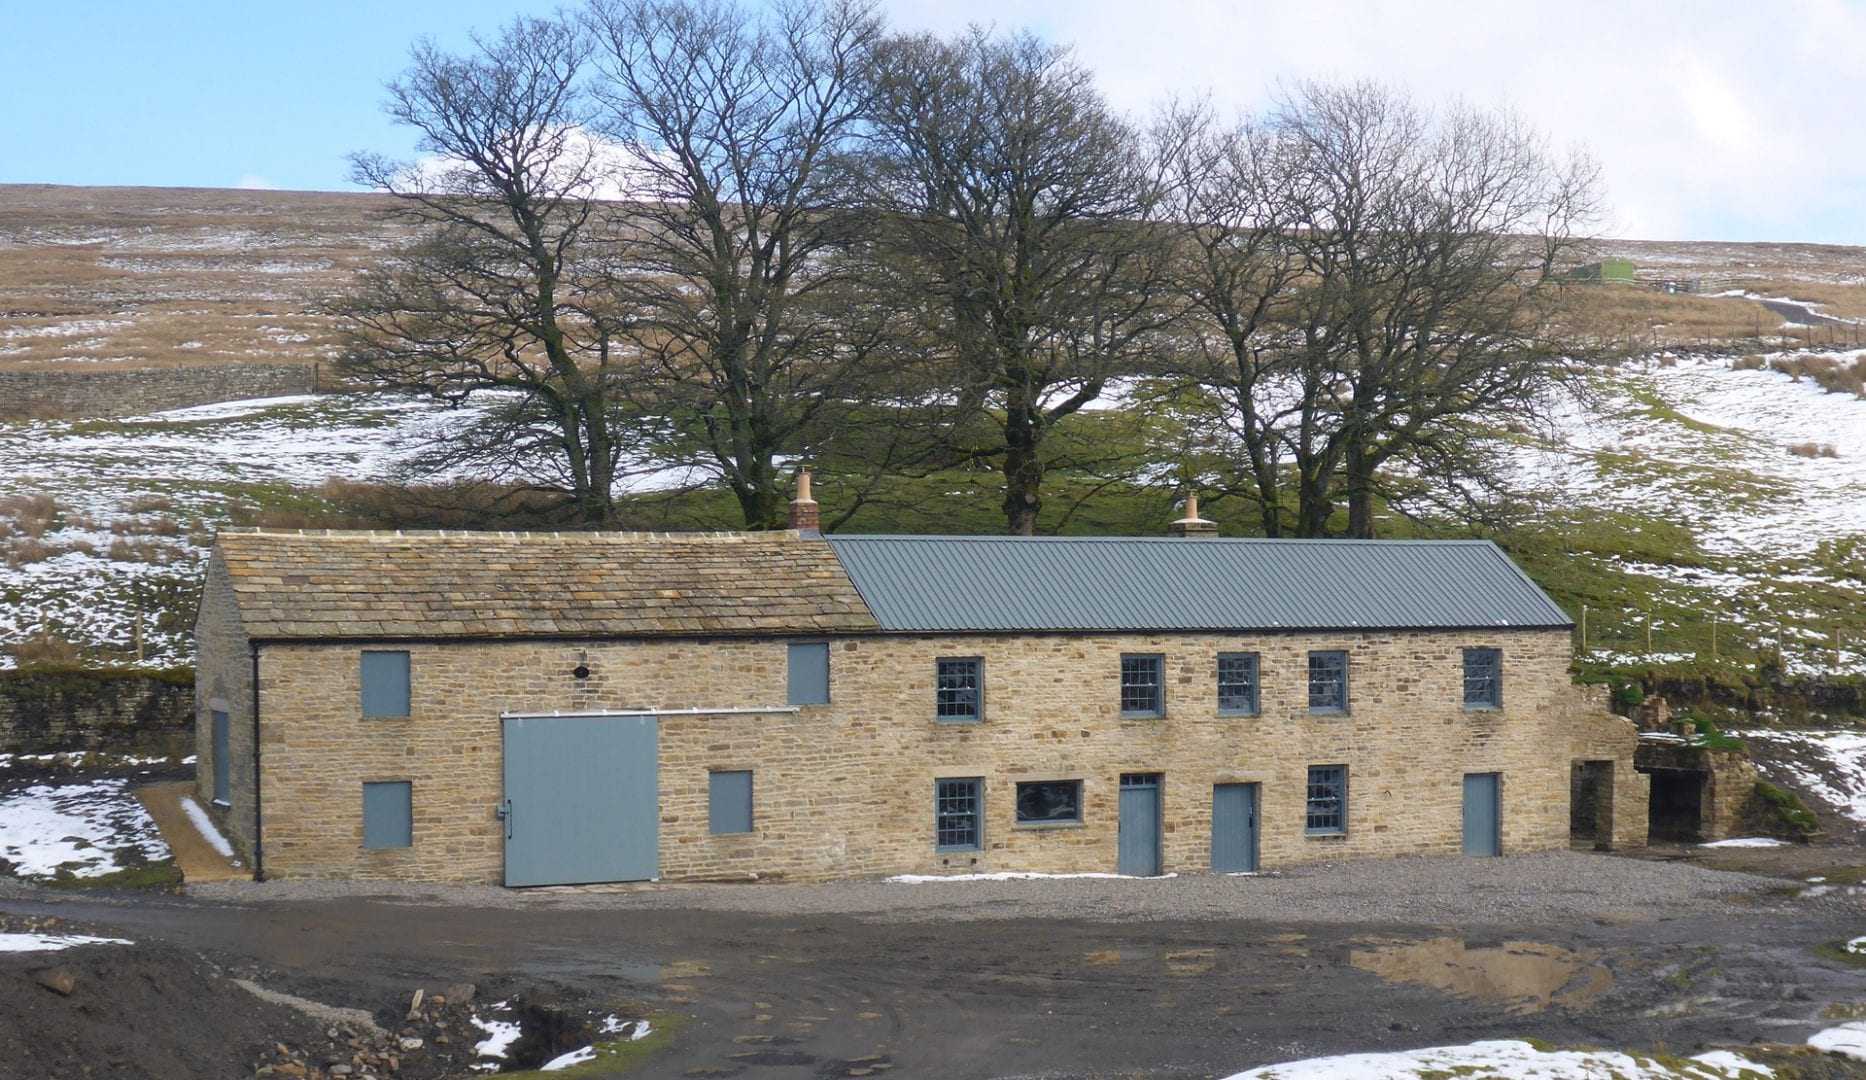 Carrshield Camping Barn, within the hostoric Barney Craig mine shop in the North Pennines, Northumberland